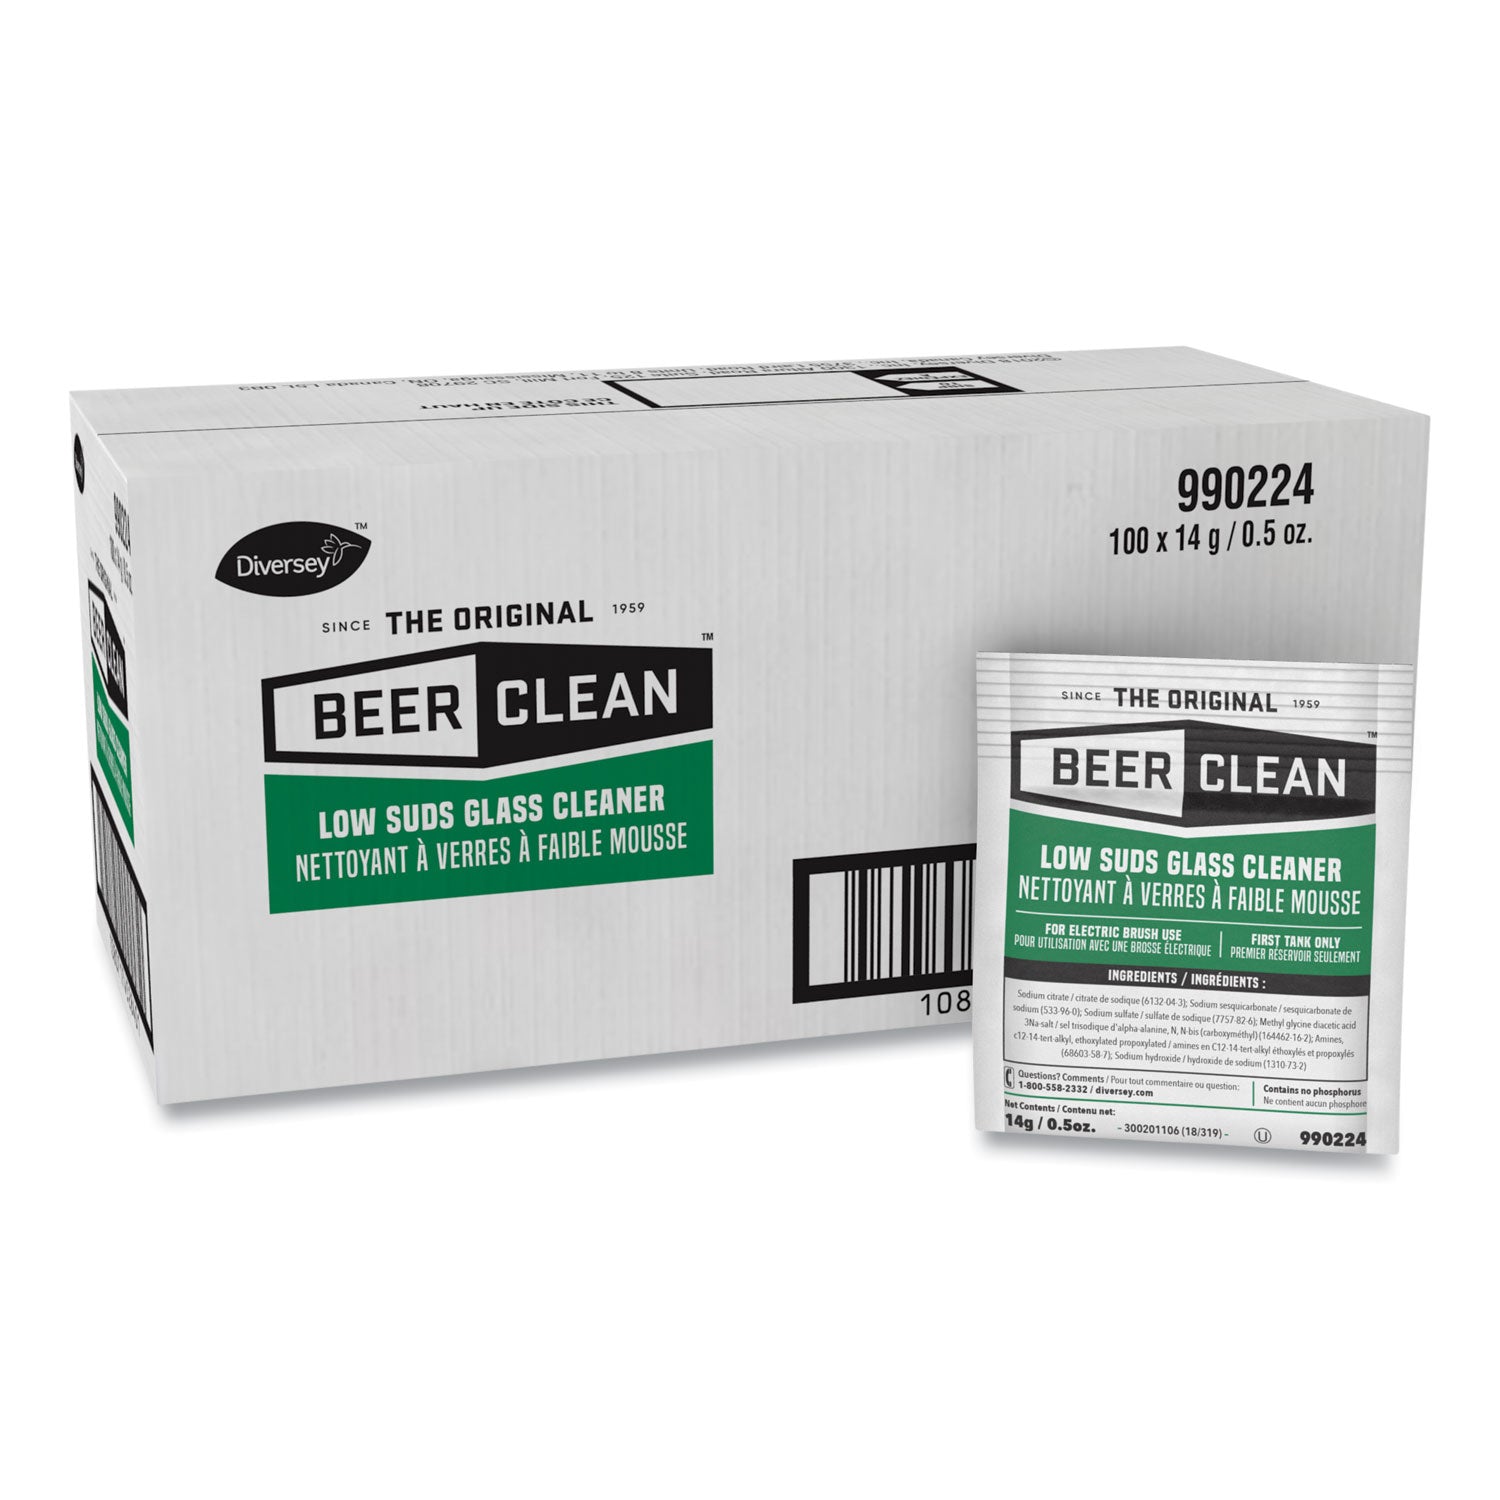 Beer Clean Glass Cleaner, Powder, 0.5 oz Packet, 100/Carton - 